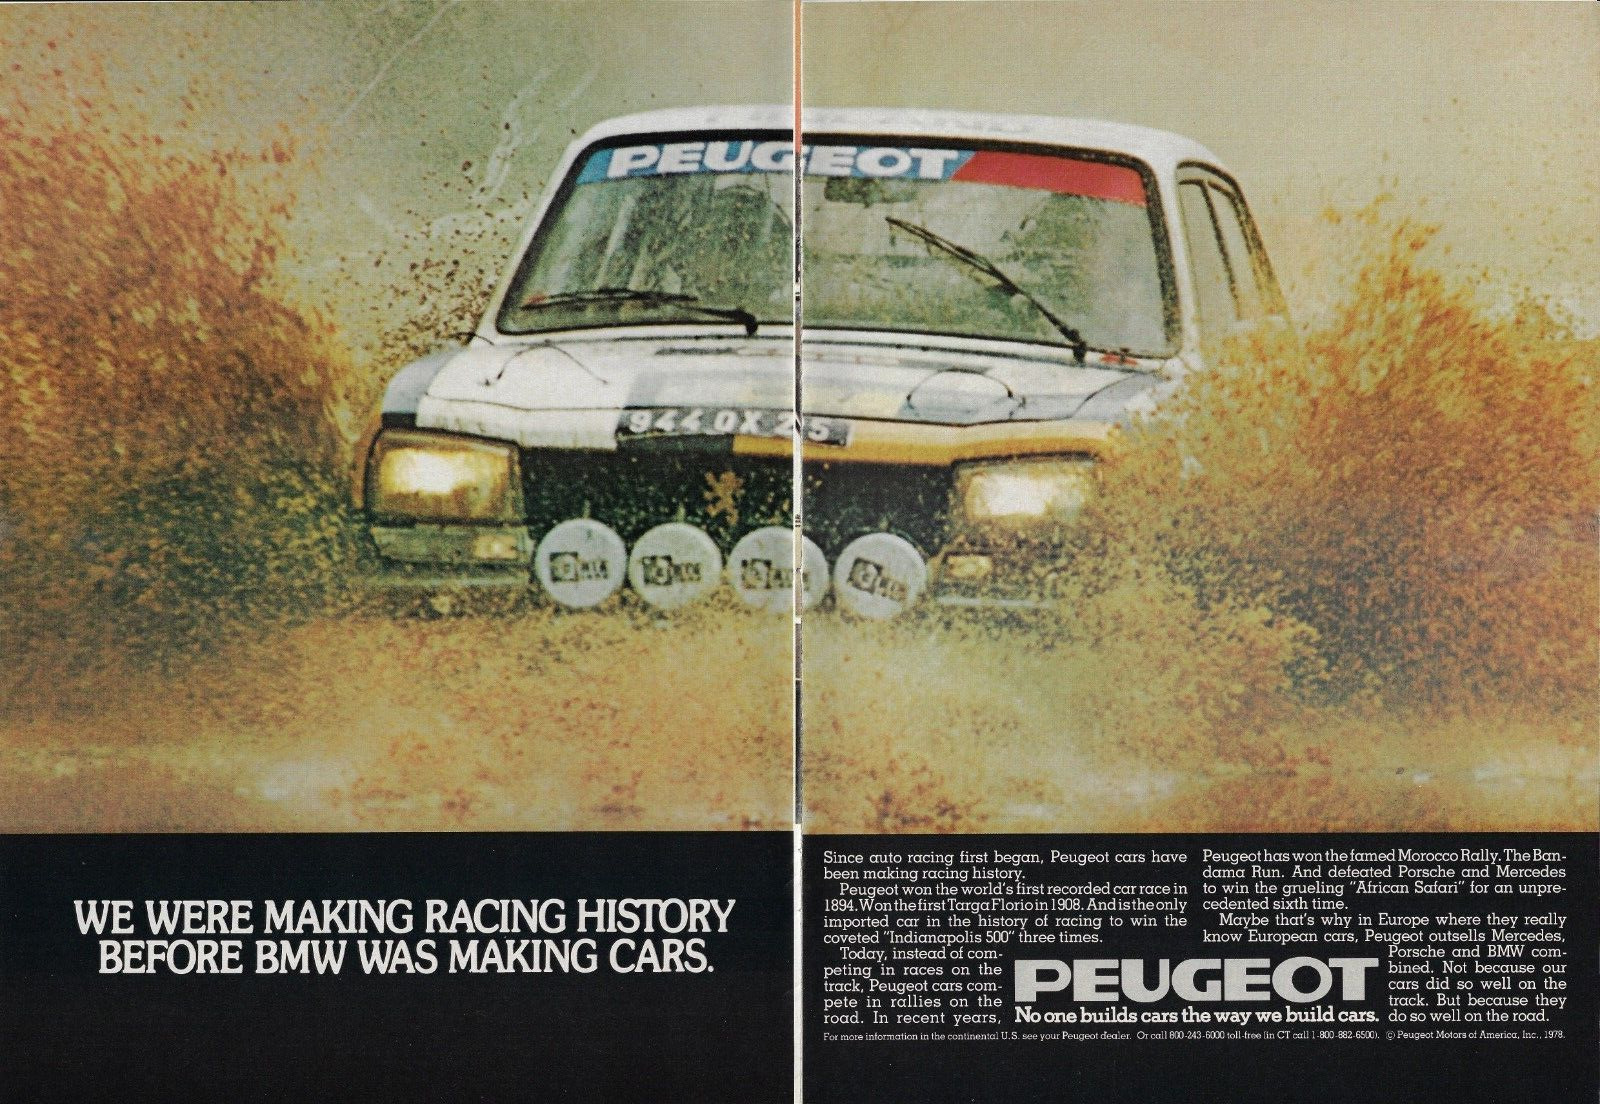 1978 Peugeot Cars Compete in Rallies Worldwide Morocco Rally Vintage Print Ad x